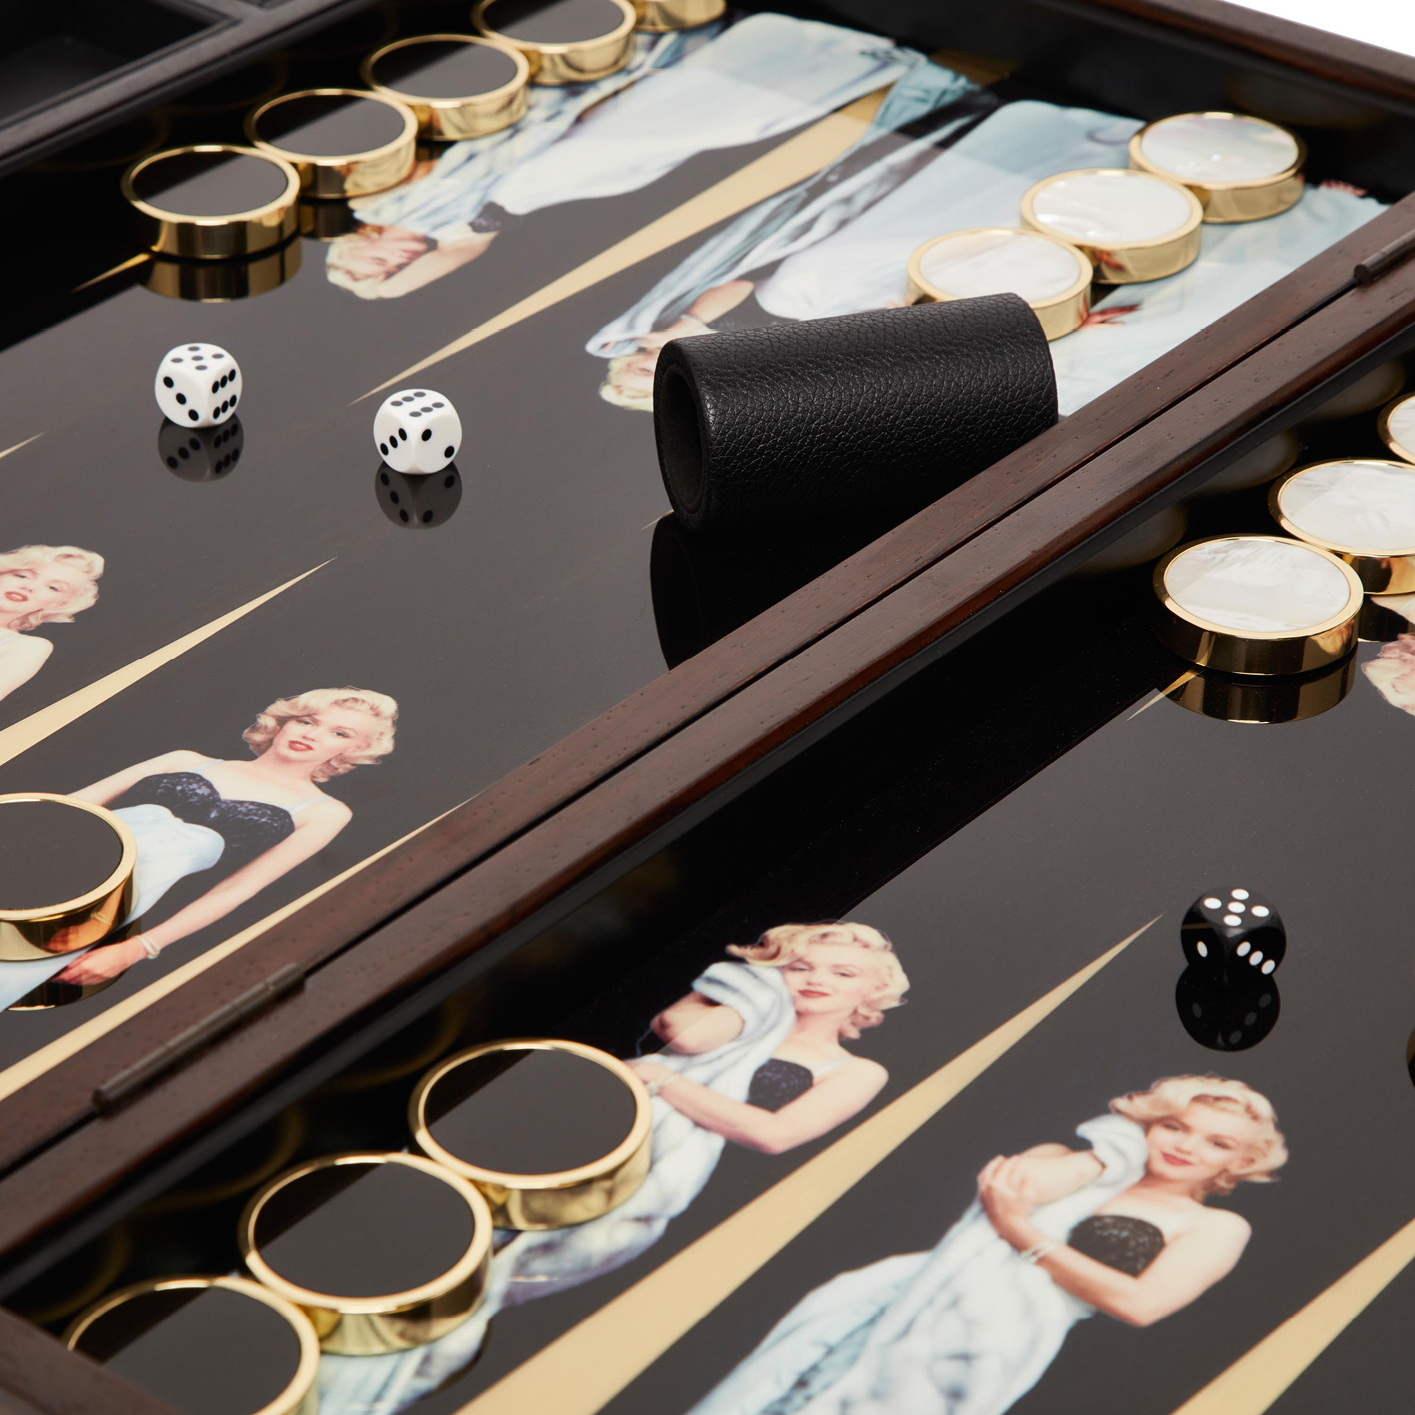 A Marilyn Monroe backgammon set, produced in a limited run of 10